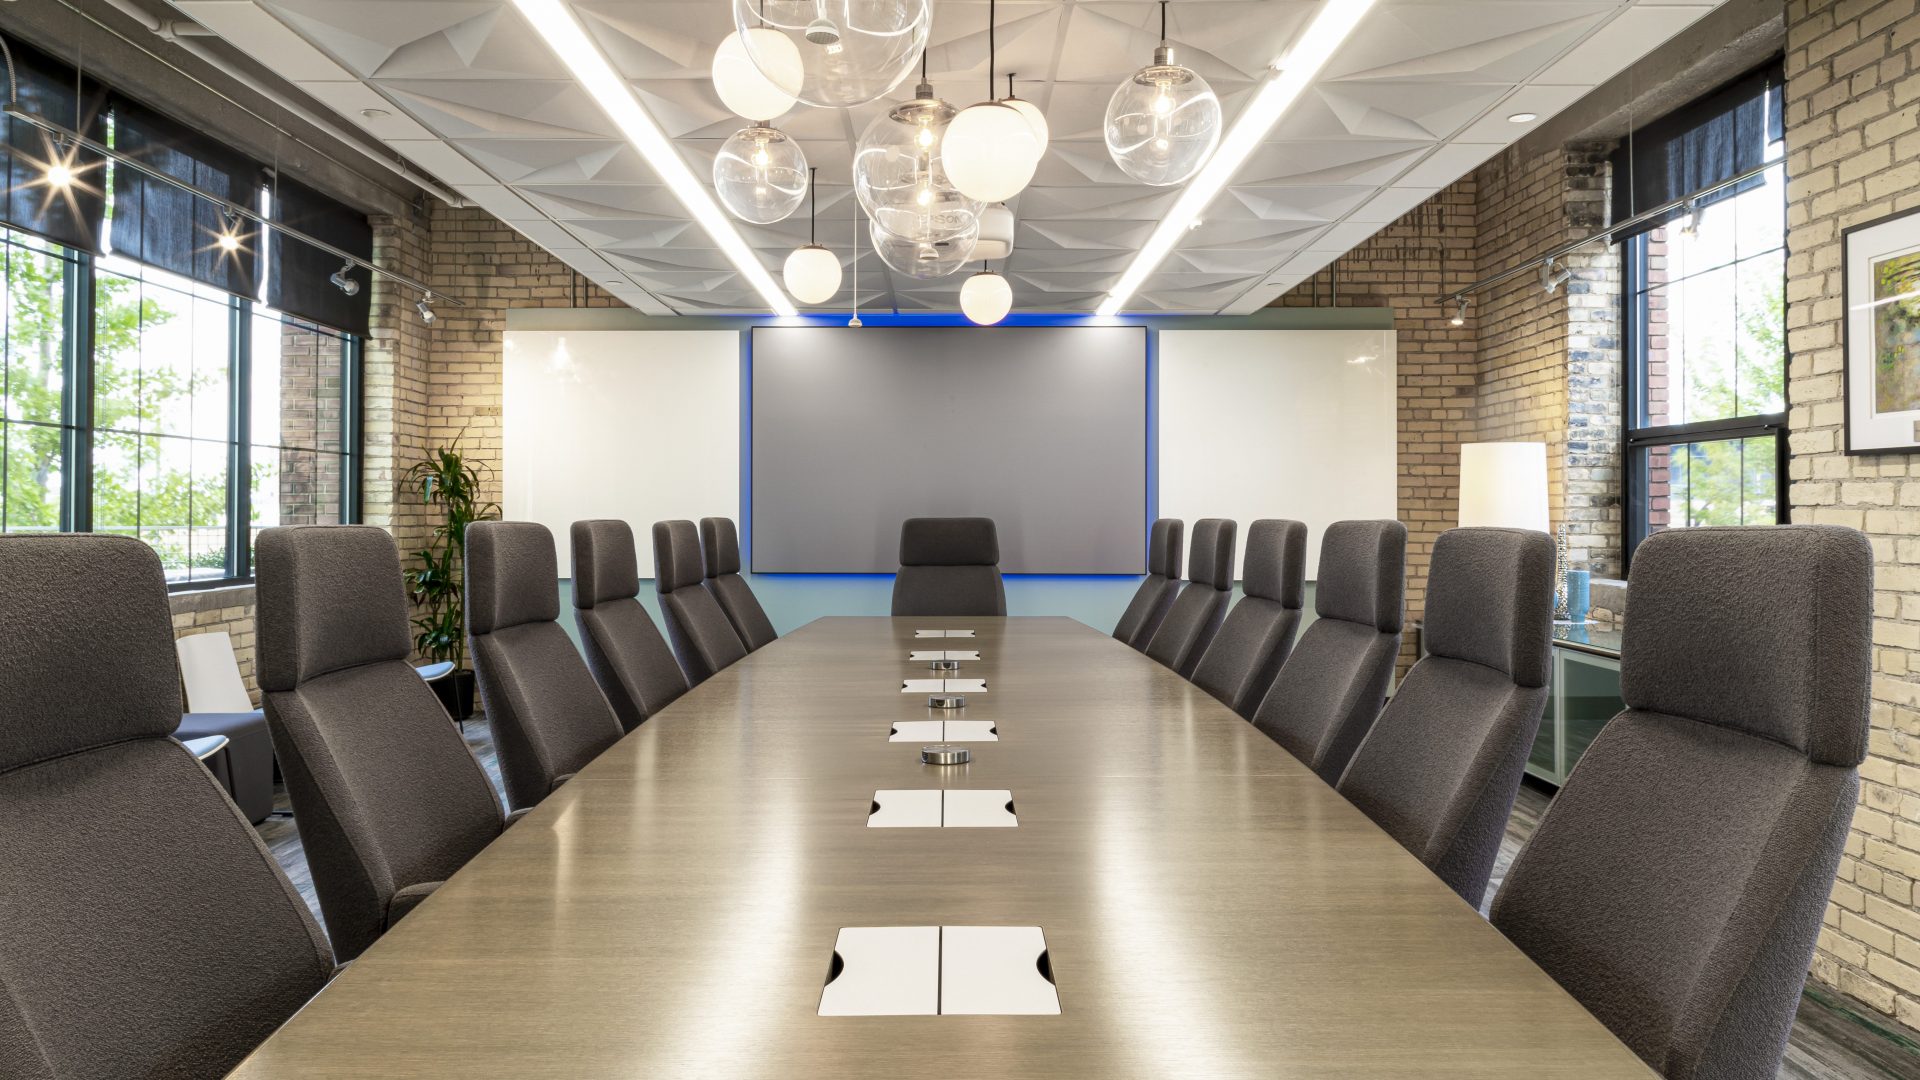 Custer designs and builds commercial and corporate workspaces that connect people and empower them to do their best work.